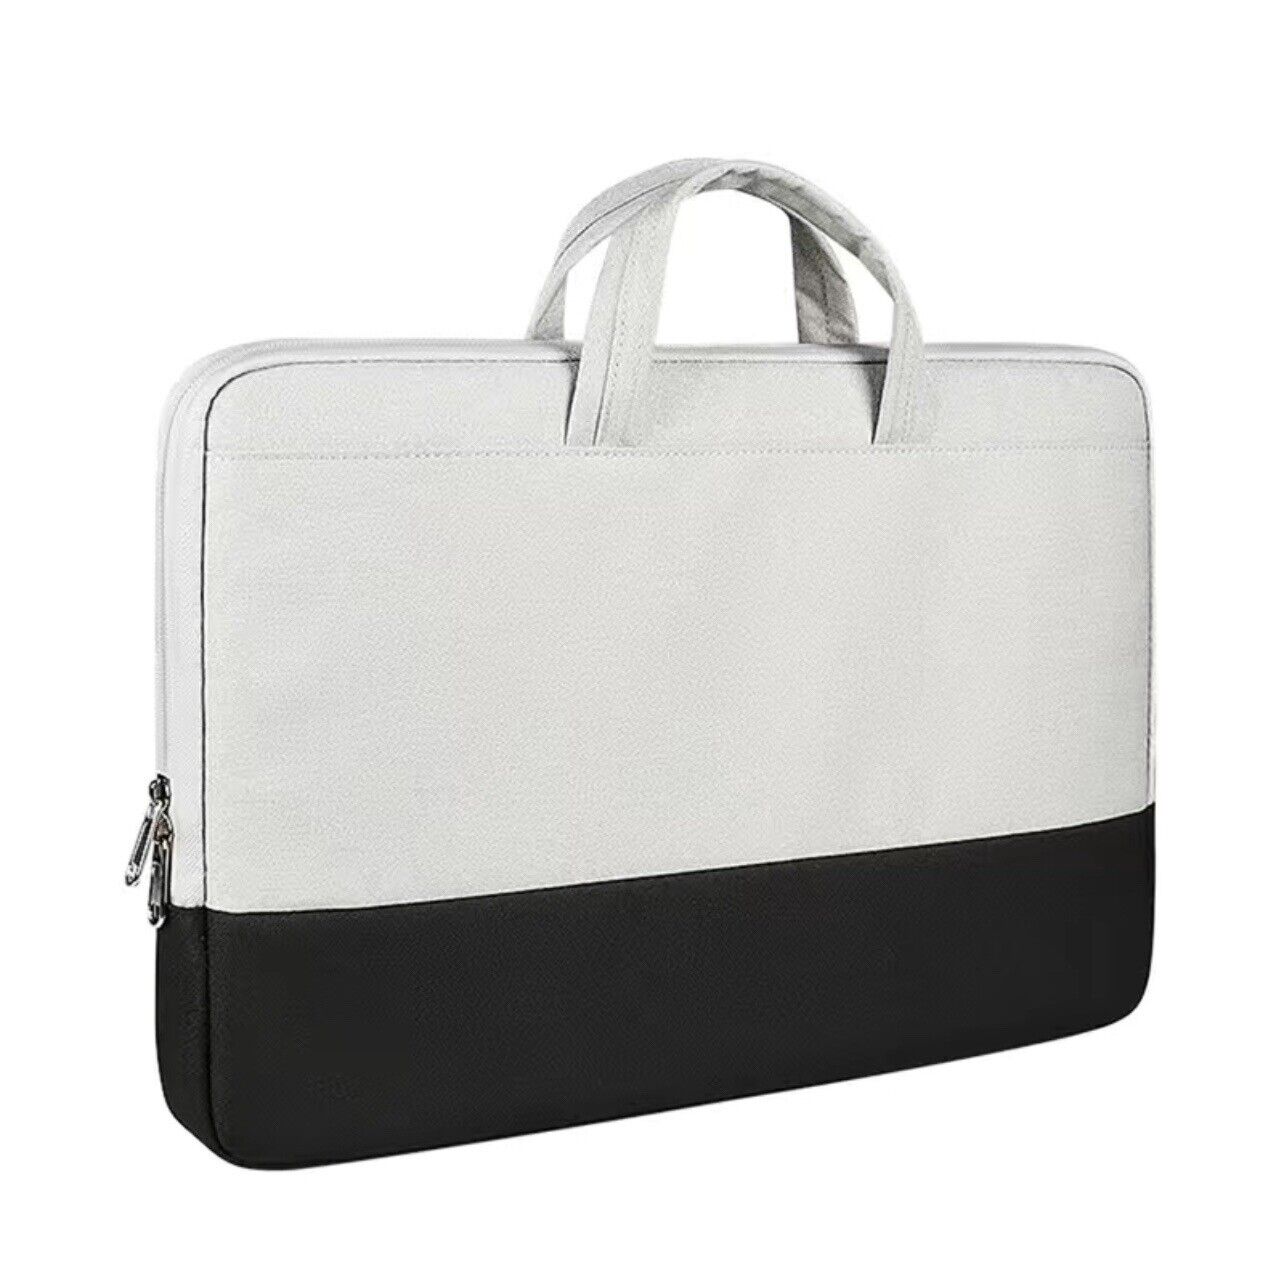 laptop Waterproof cover Bag 13.3 inch With Inside Compartment . Available Now for 45.00